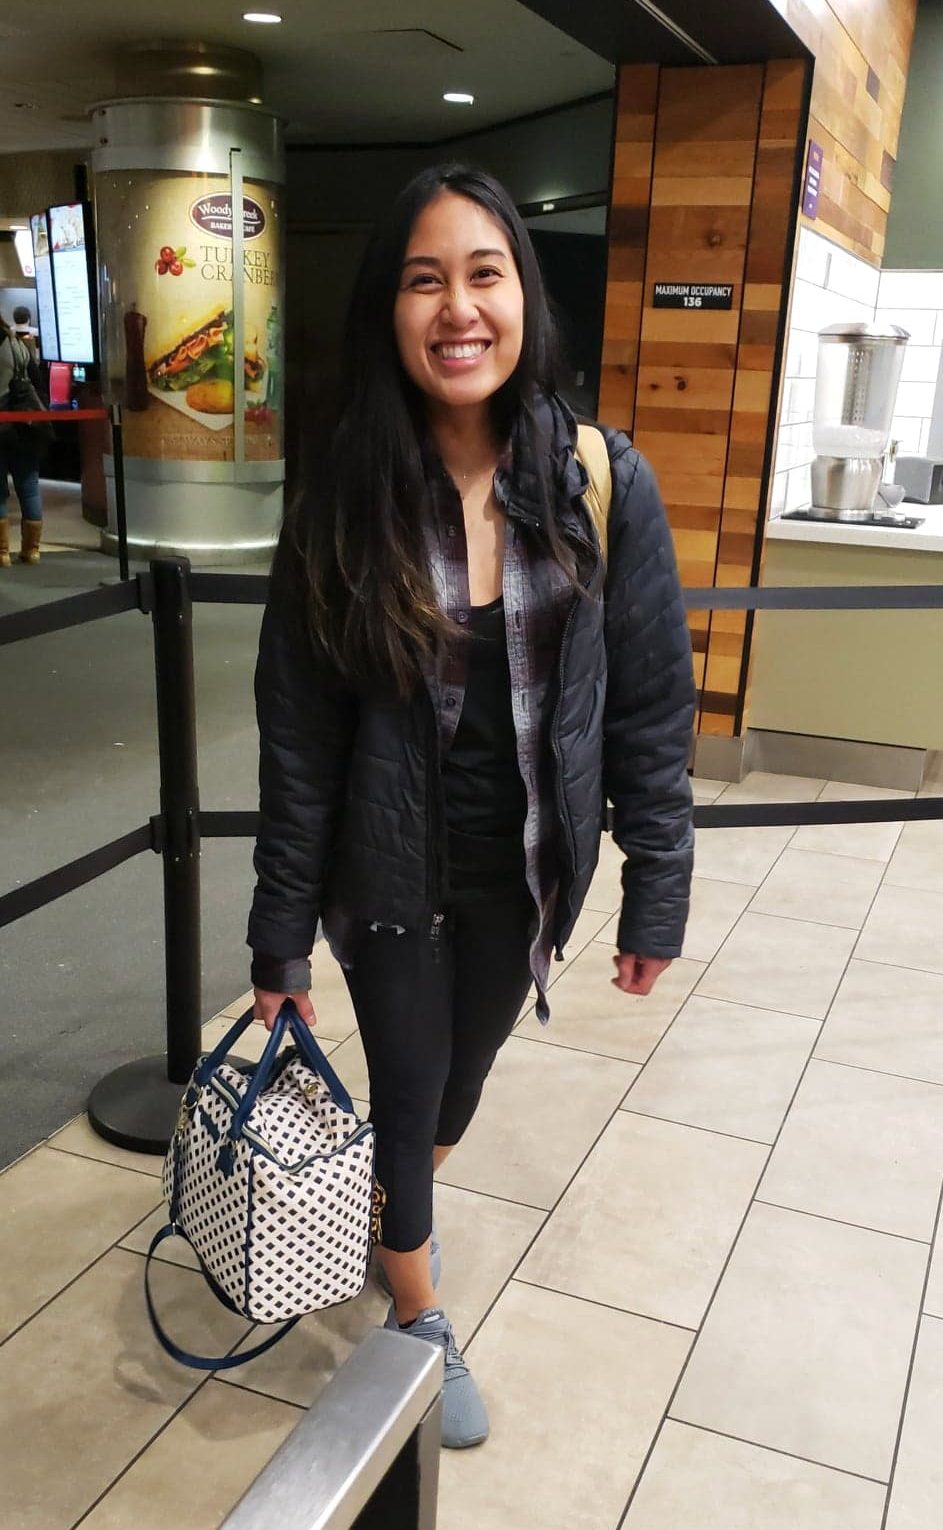 Christina carrying a lunchbox in the airport